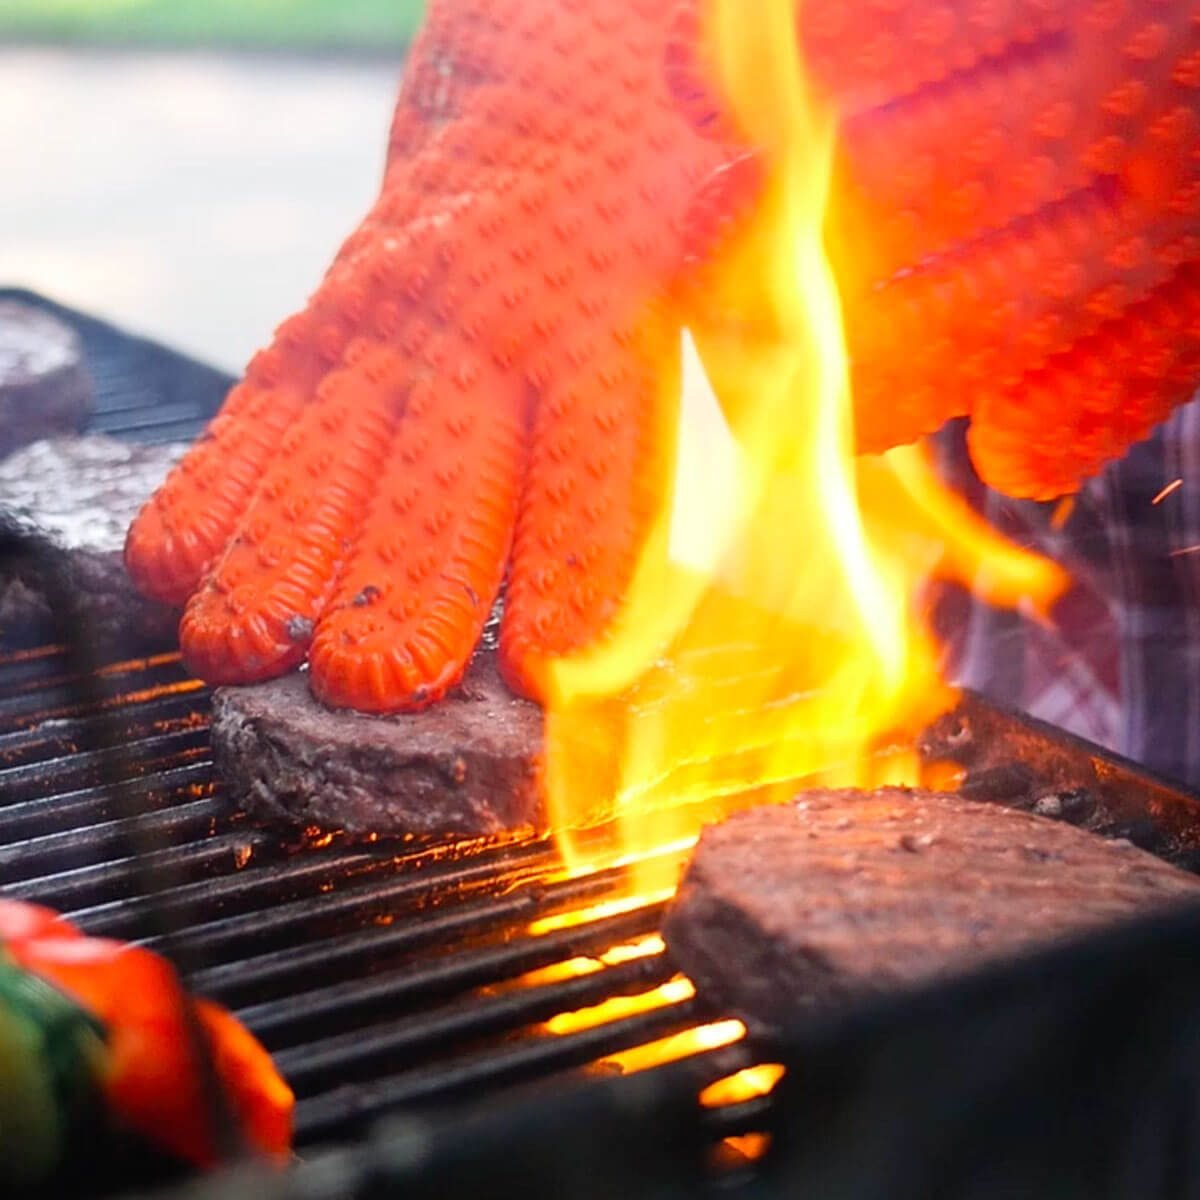 8 Things You Should Never Do To Your Grill